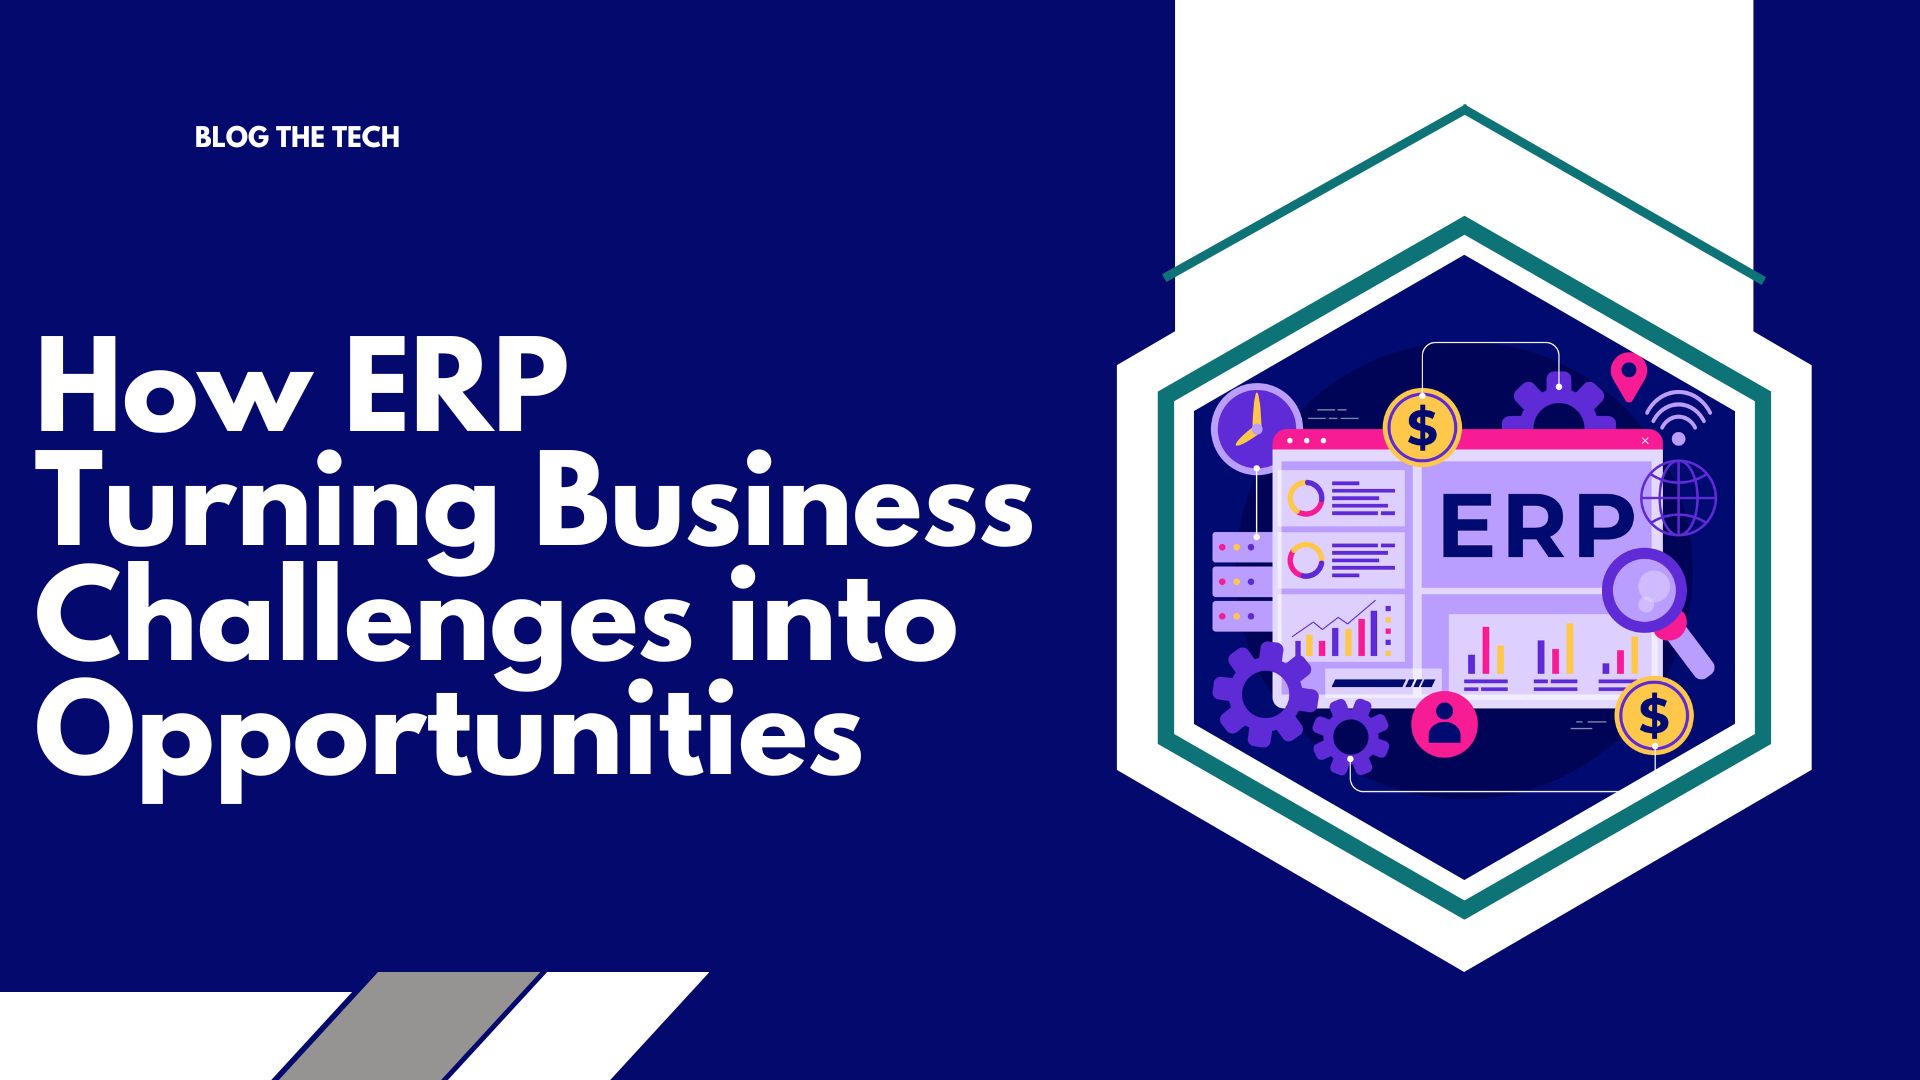 How ERP Turning Business Challenges into Opportunities